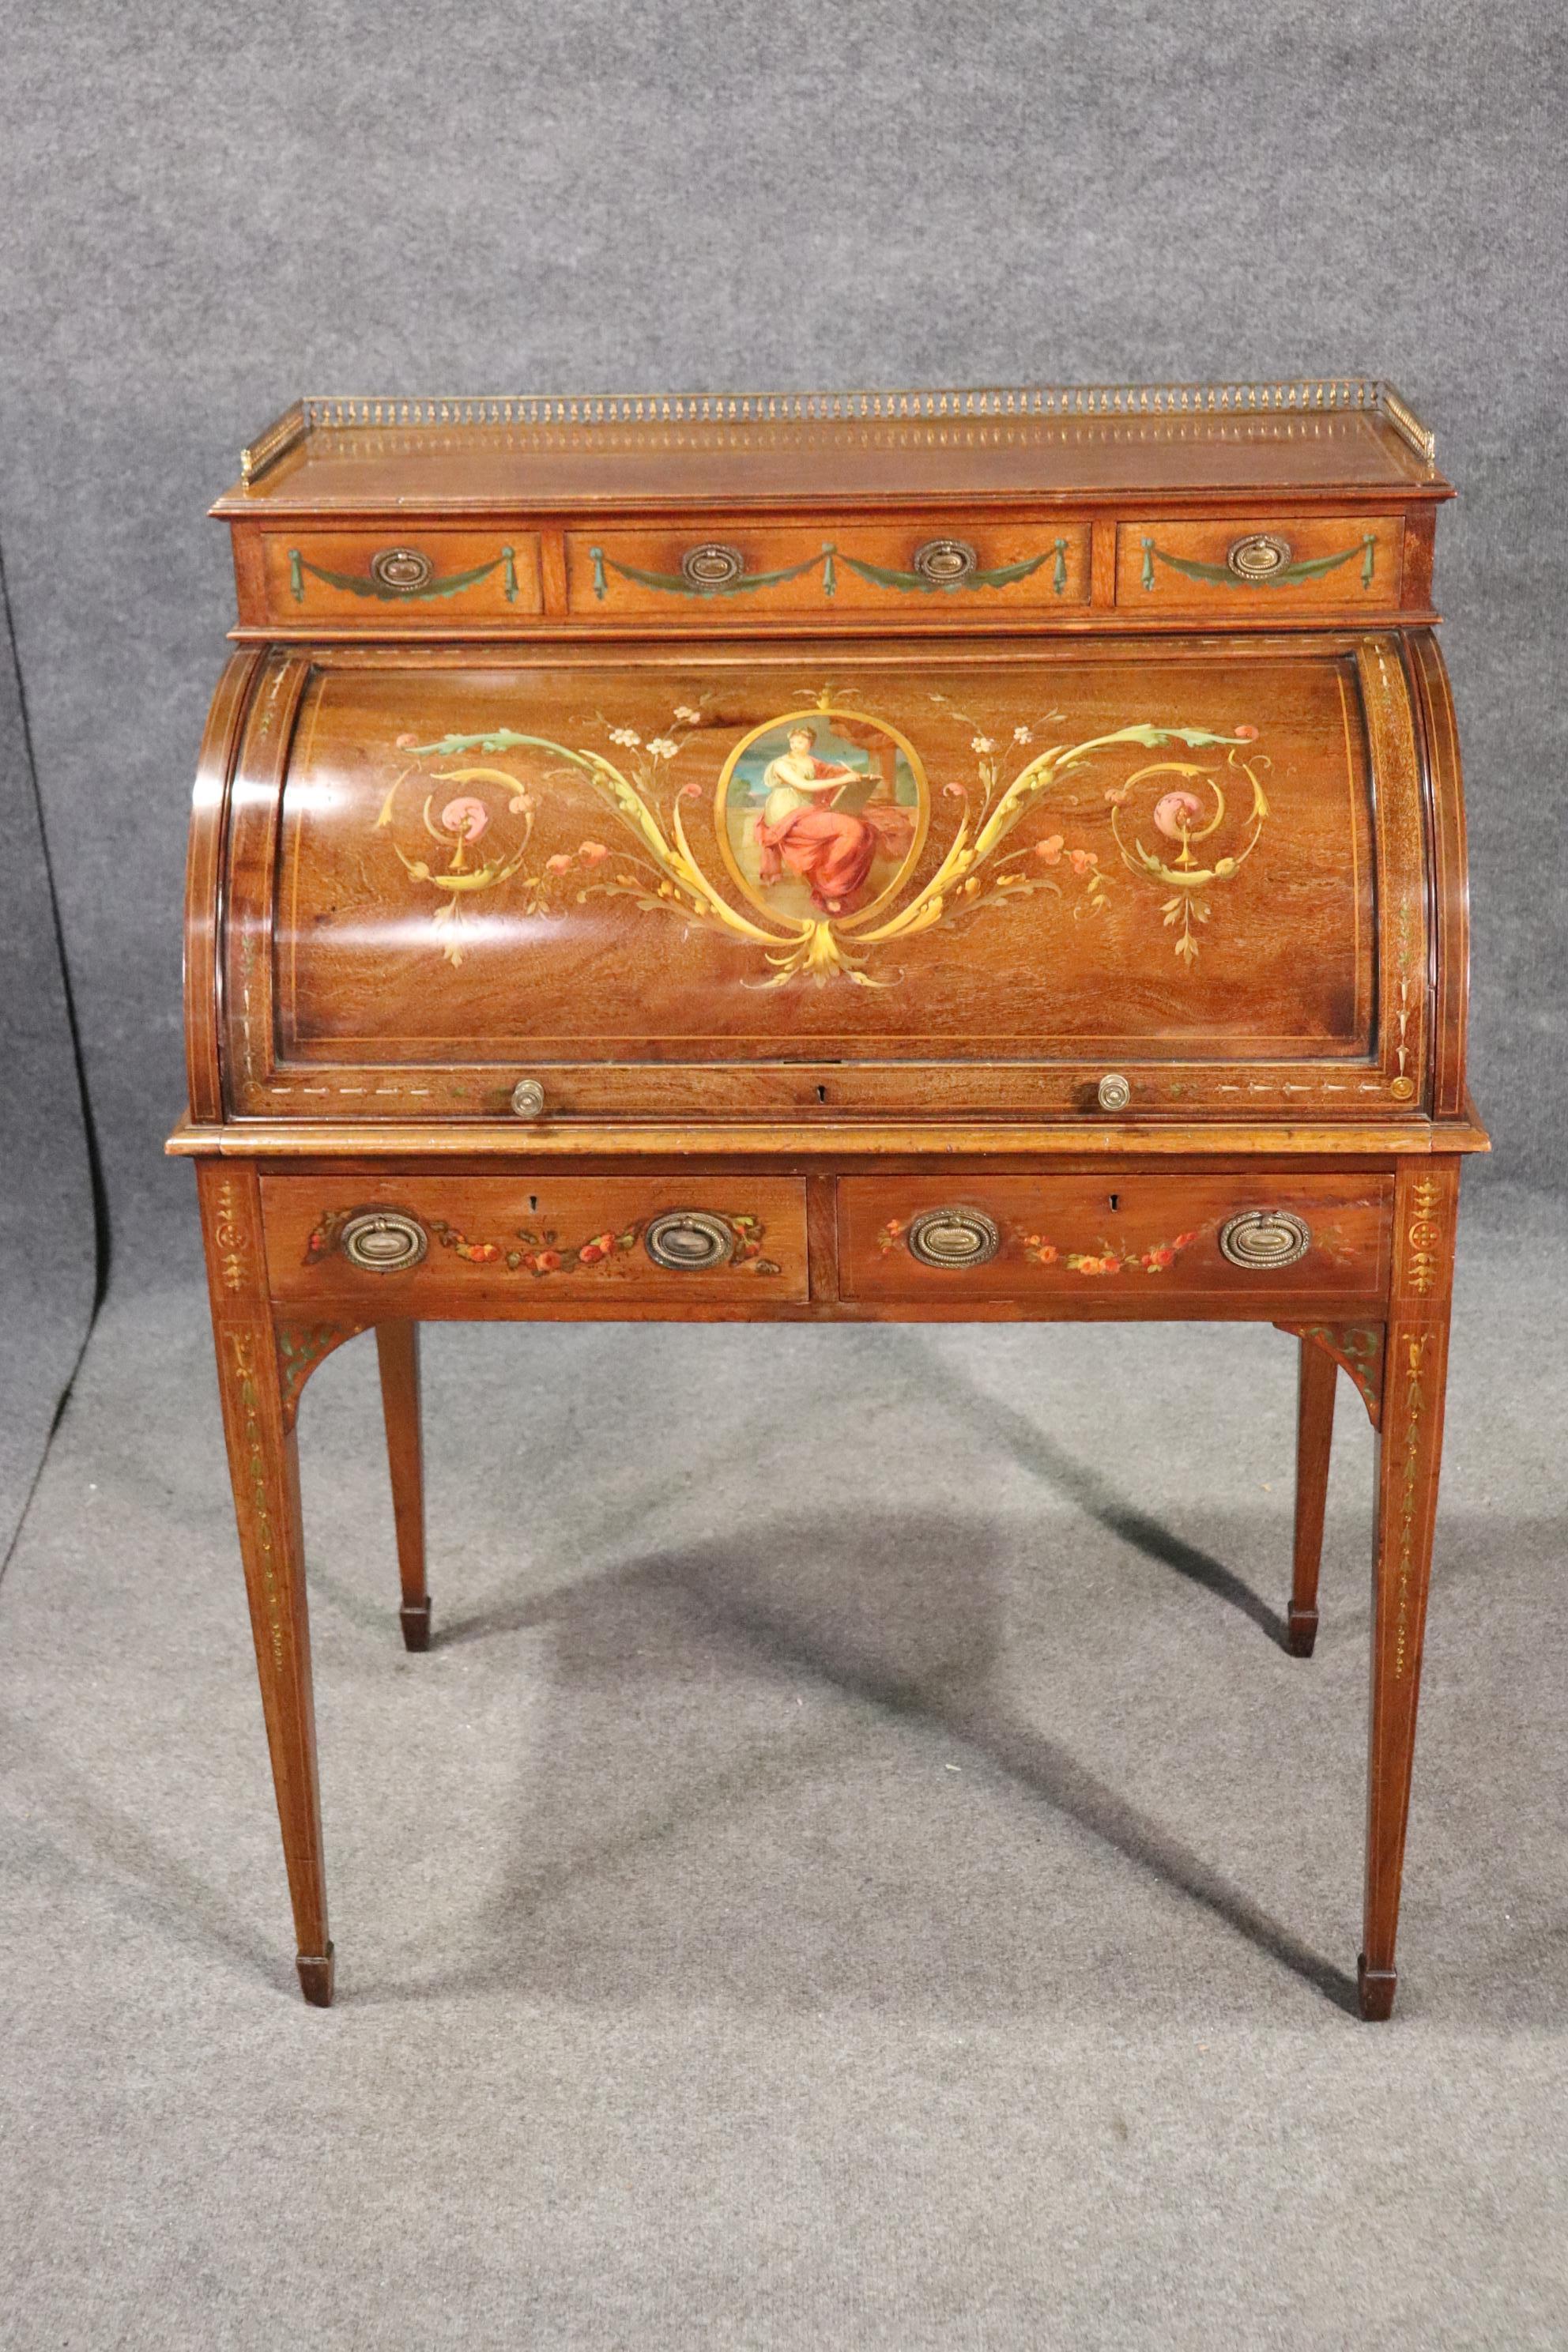 This exceptional paint decorated cylinder desk is in good original antique condition and features the most beautiful painting, and the leather desk surface is embossed and gold tooled. The desk is made of superb mahogany and is one of the most